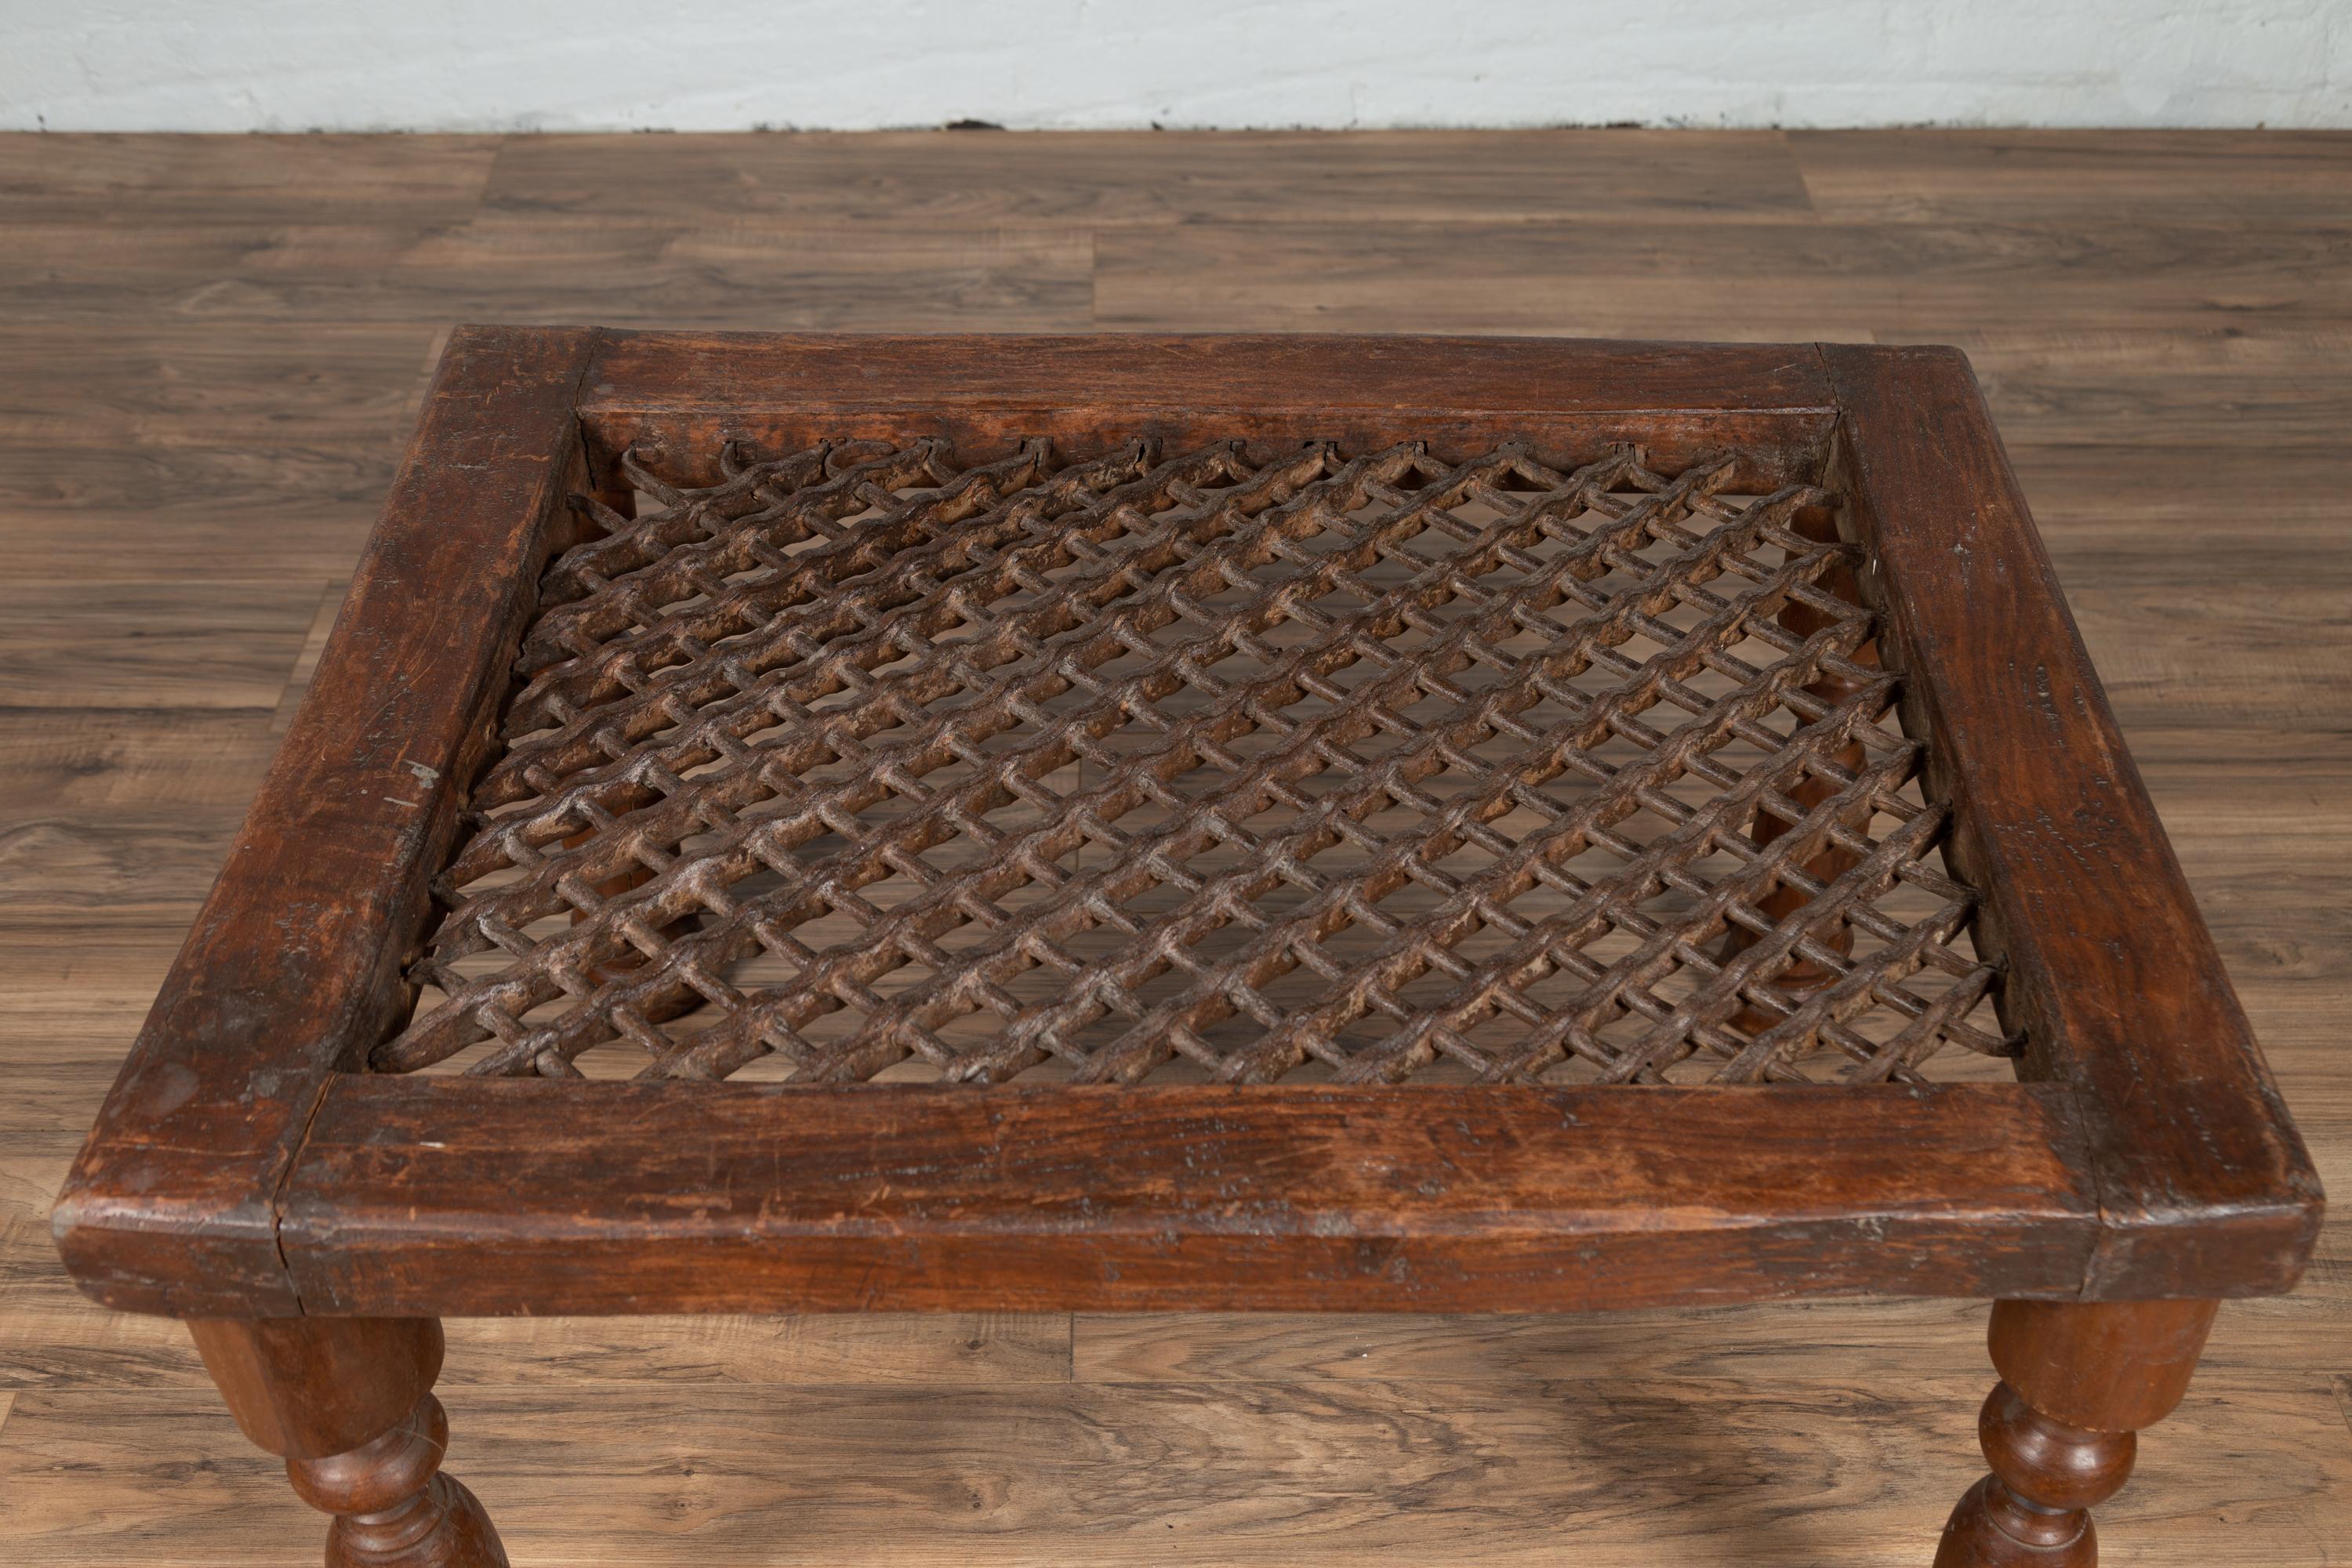 Rustic Antique Indian Window Grate Made into a Low Side Table with Turned Baluster Legs